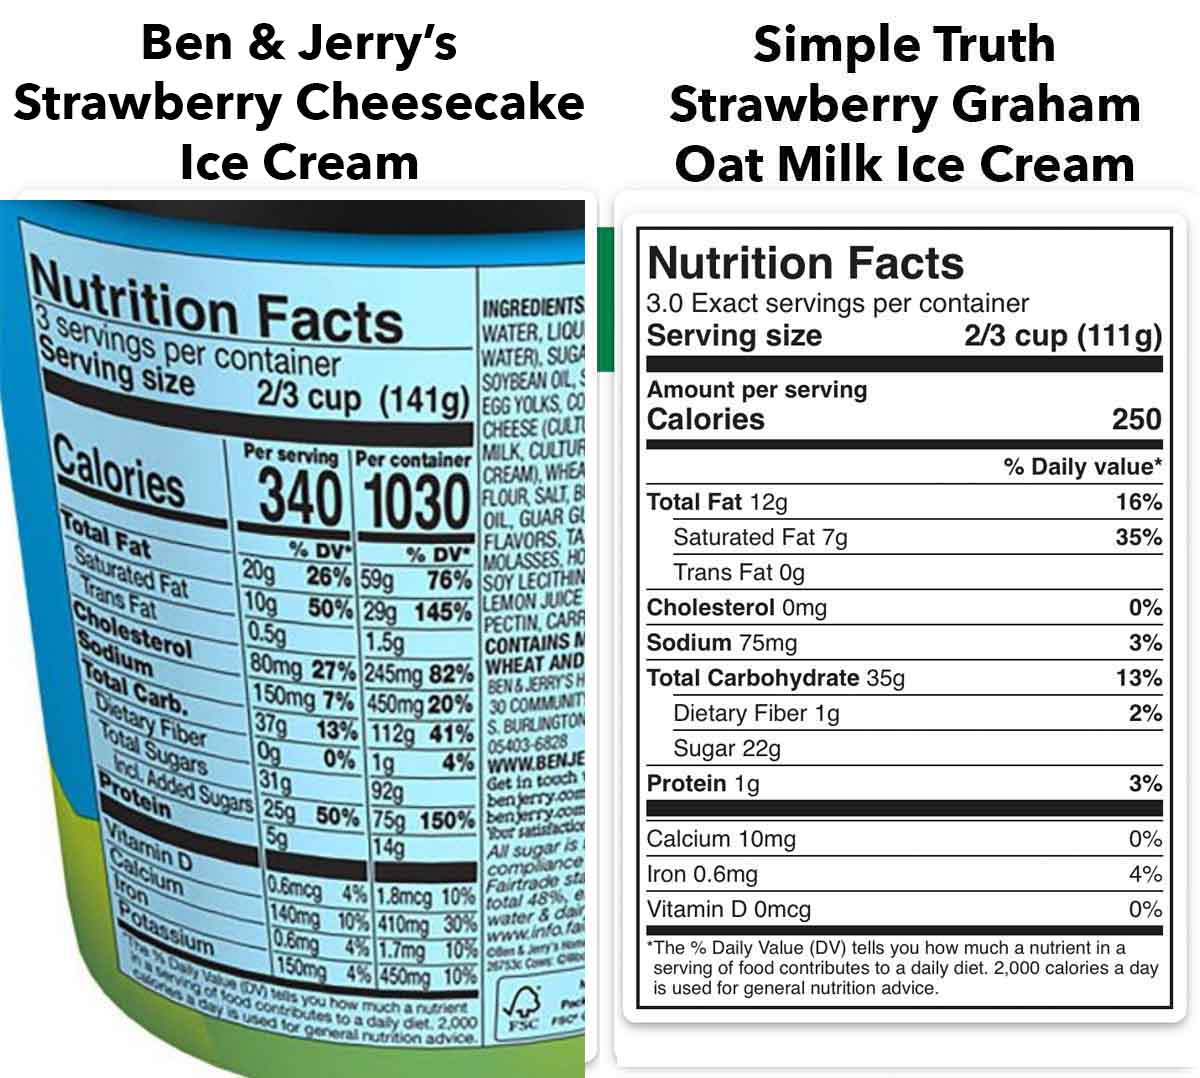 side-by-side comparison of Ben & Jerry's Strawberry Cheesecake Ice Cream and Simple Truth Oat Milk Ice Cream